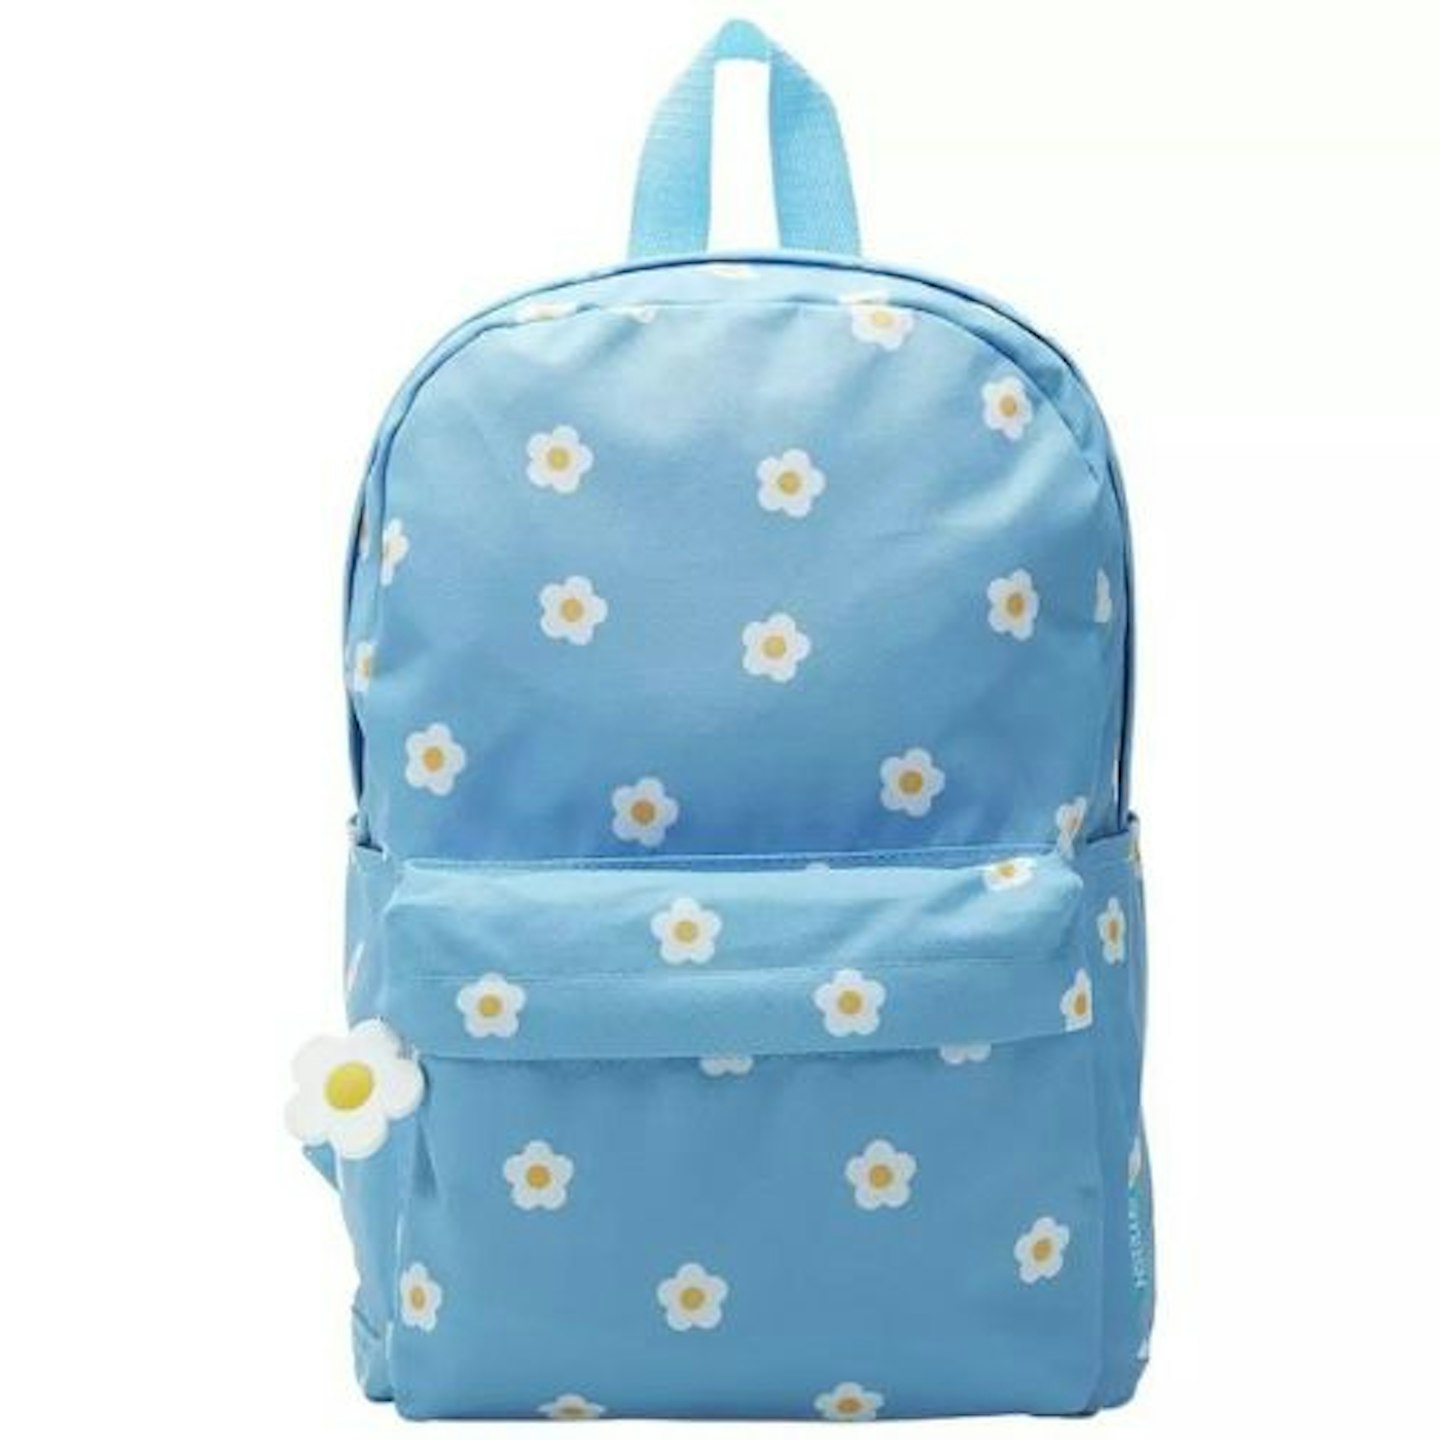 best back to school essentials shopping guide Smash Daisy Backpack